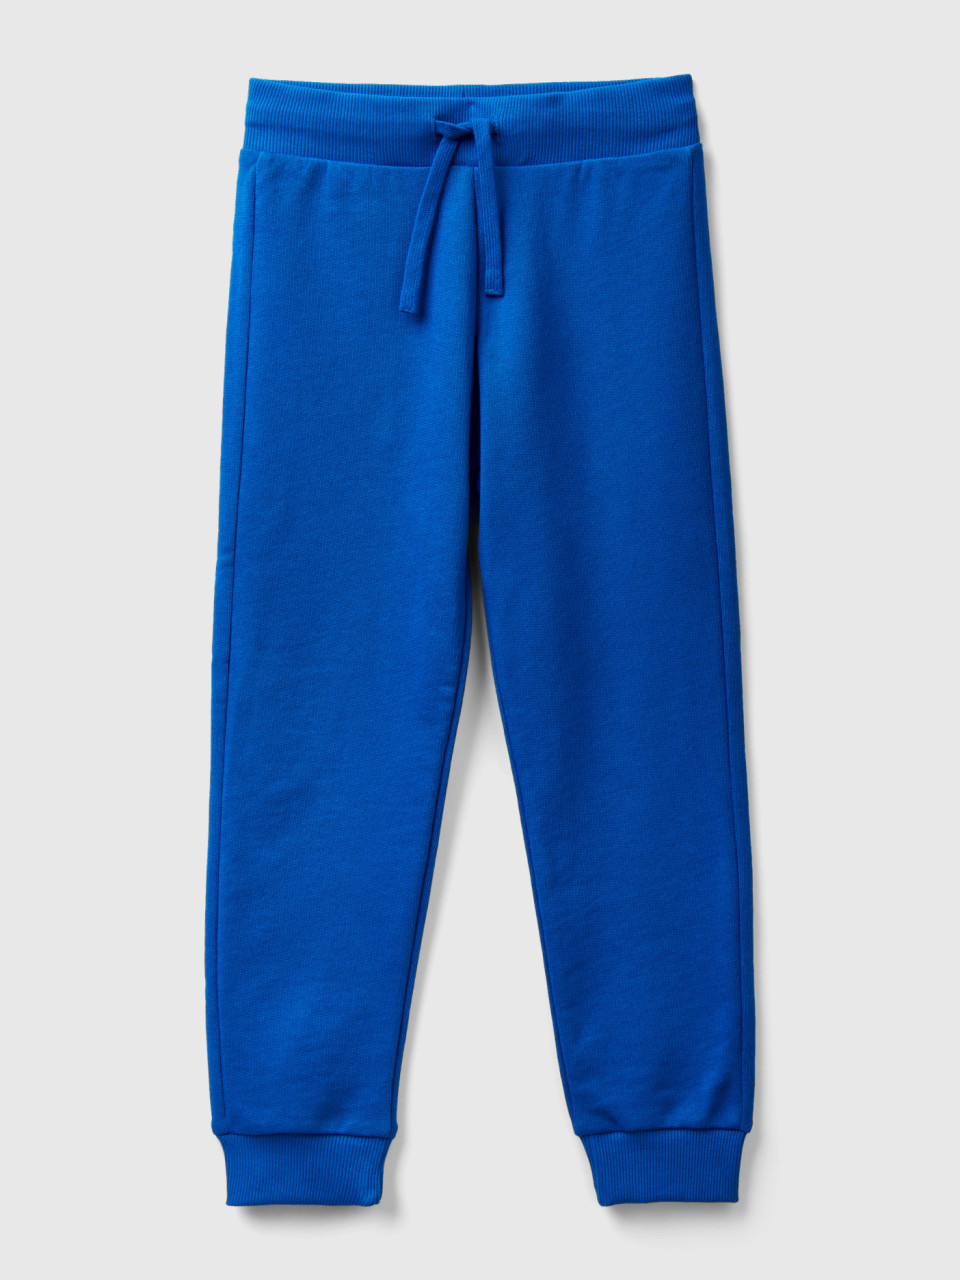 Benetton, Sporty Trousers With Drawstring, Bright Blue, Kids